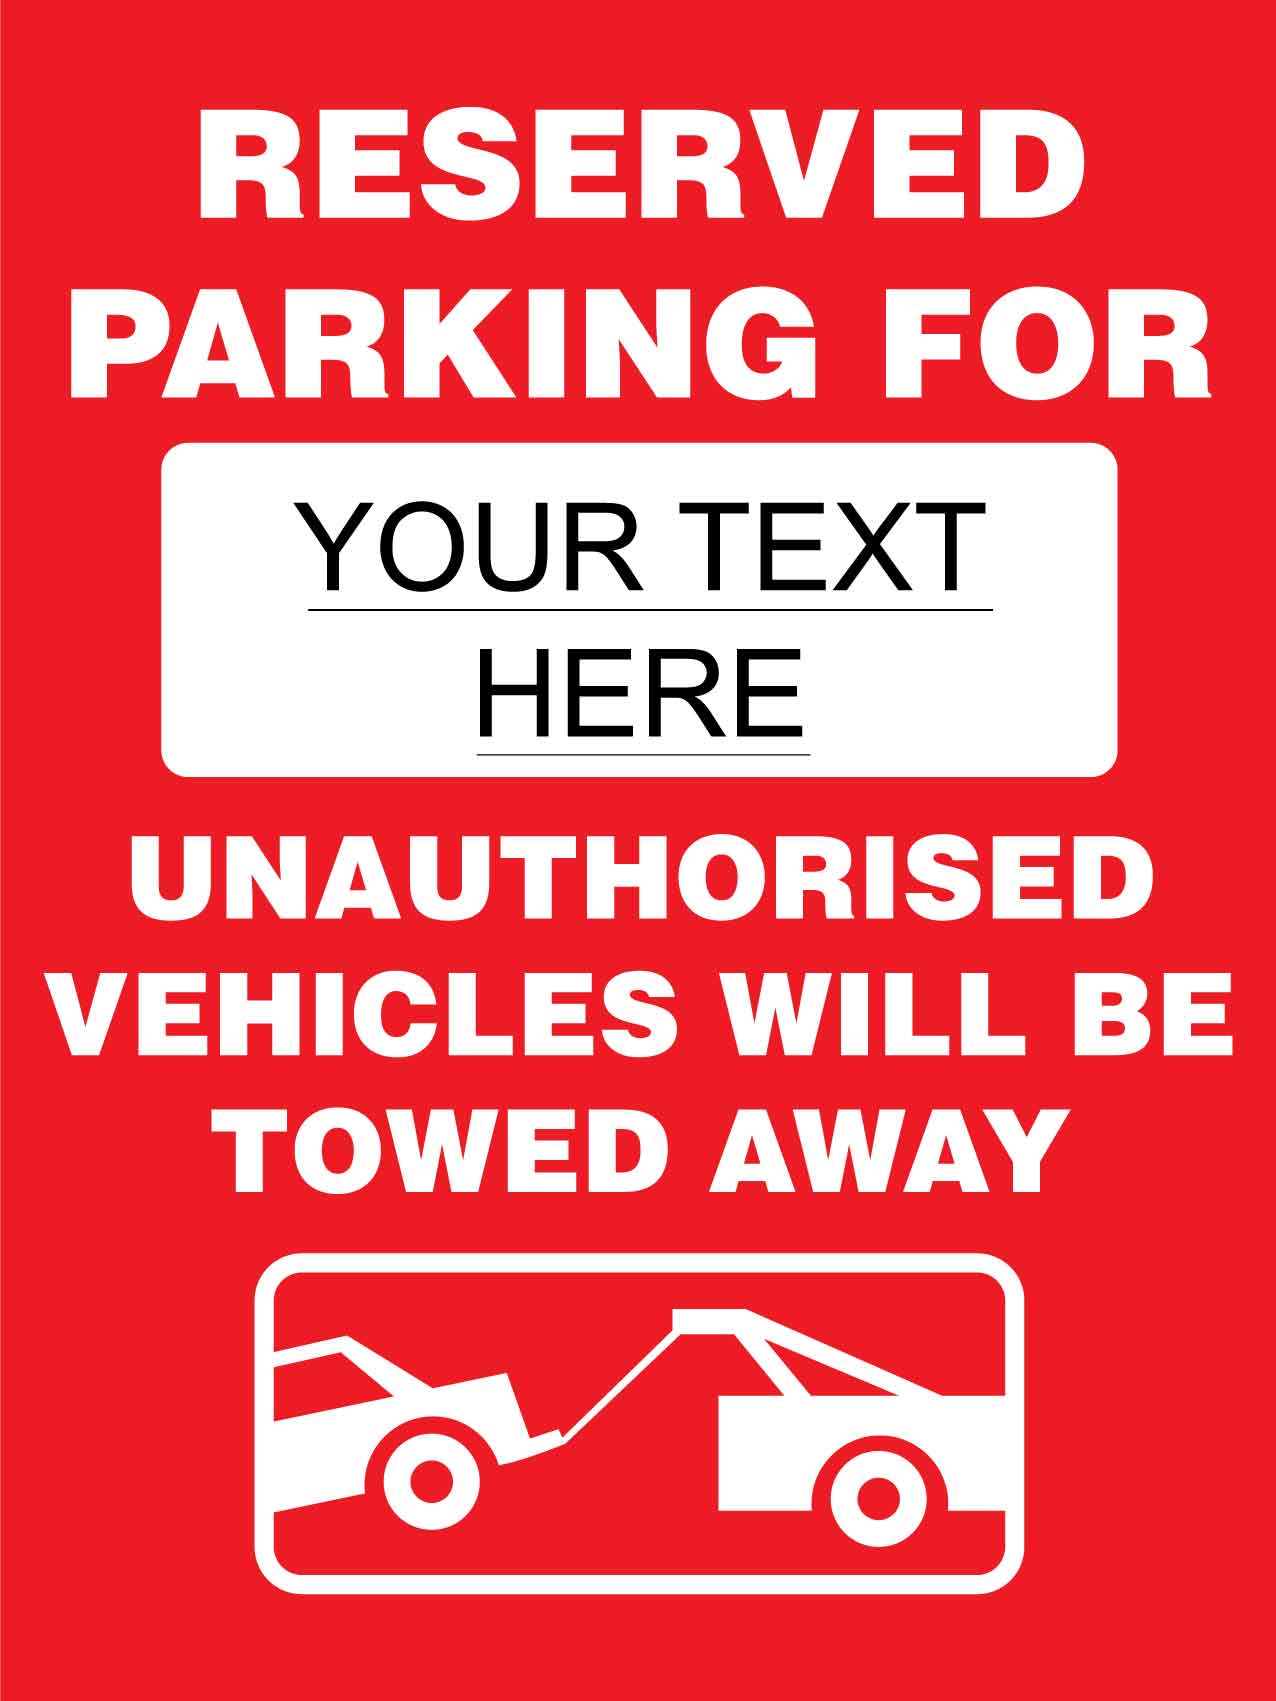 Reserved Parking For .... Unauthorised Vehicles Will Be Towed Away Sign